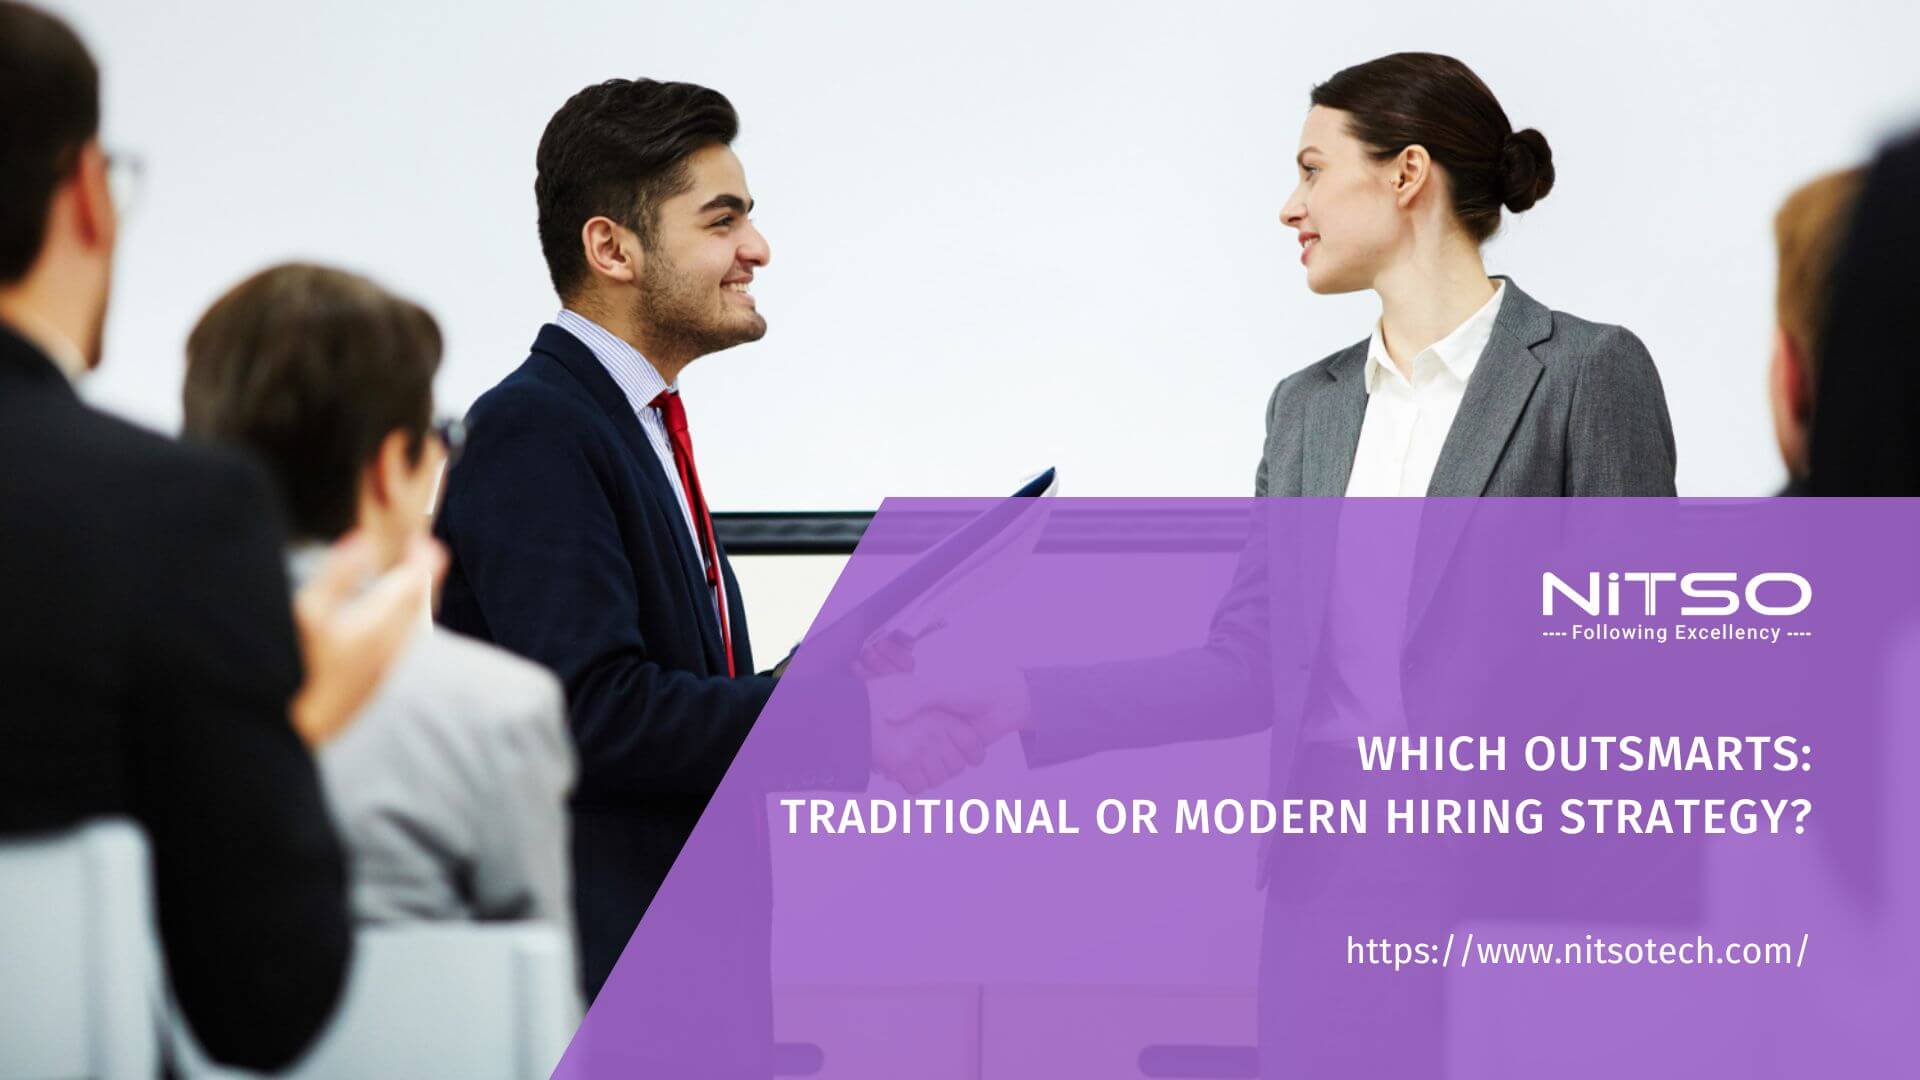 Which Outsmarts: Traditional vs Modern Hiring Strategy?